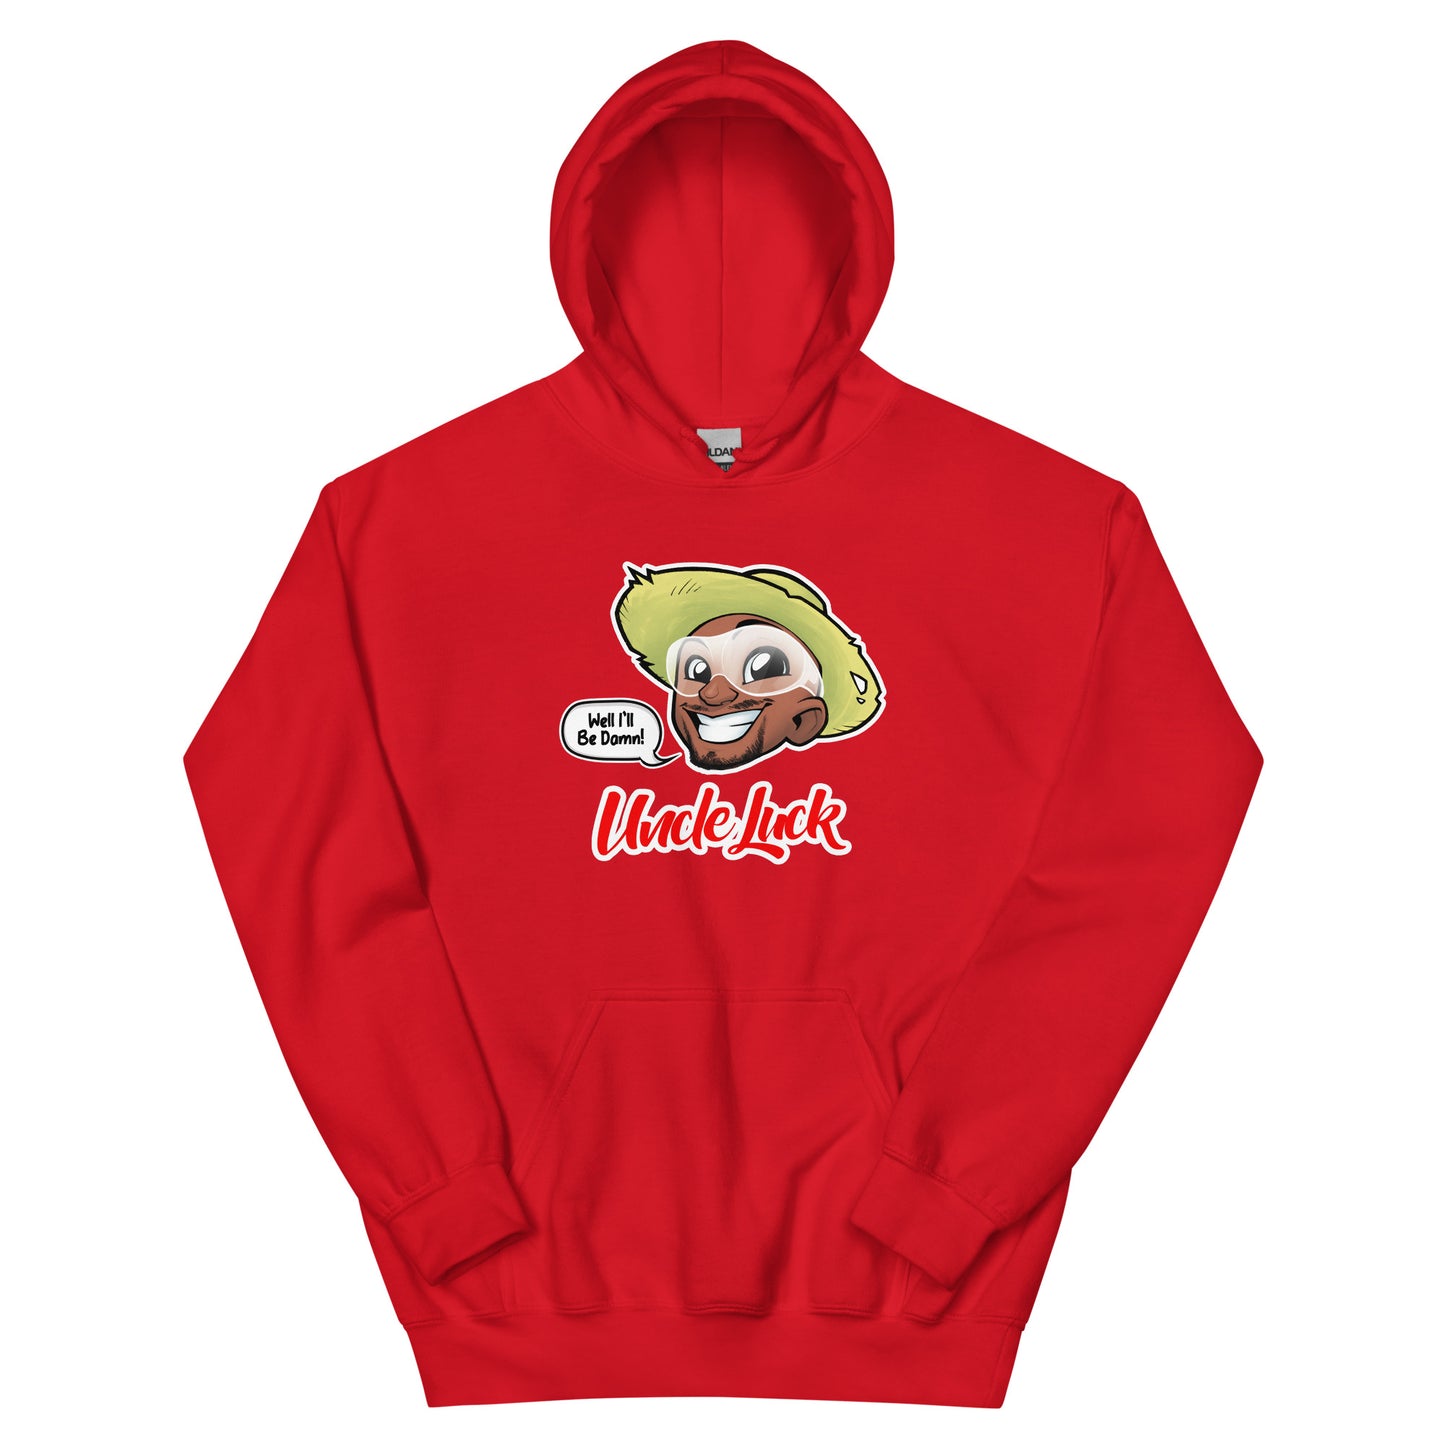 Uncle Luck Graphic Hoodie